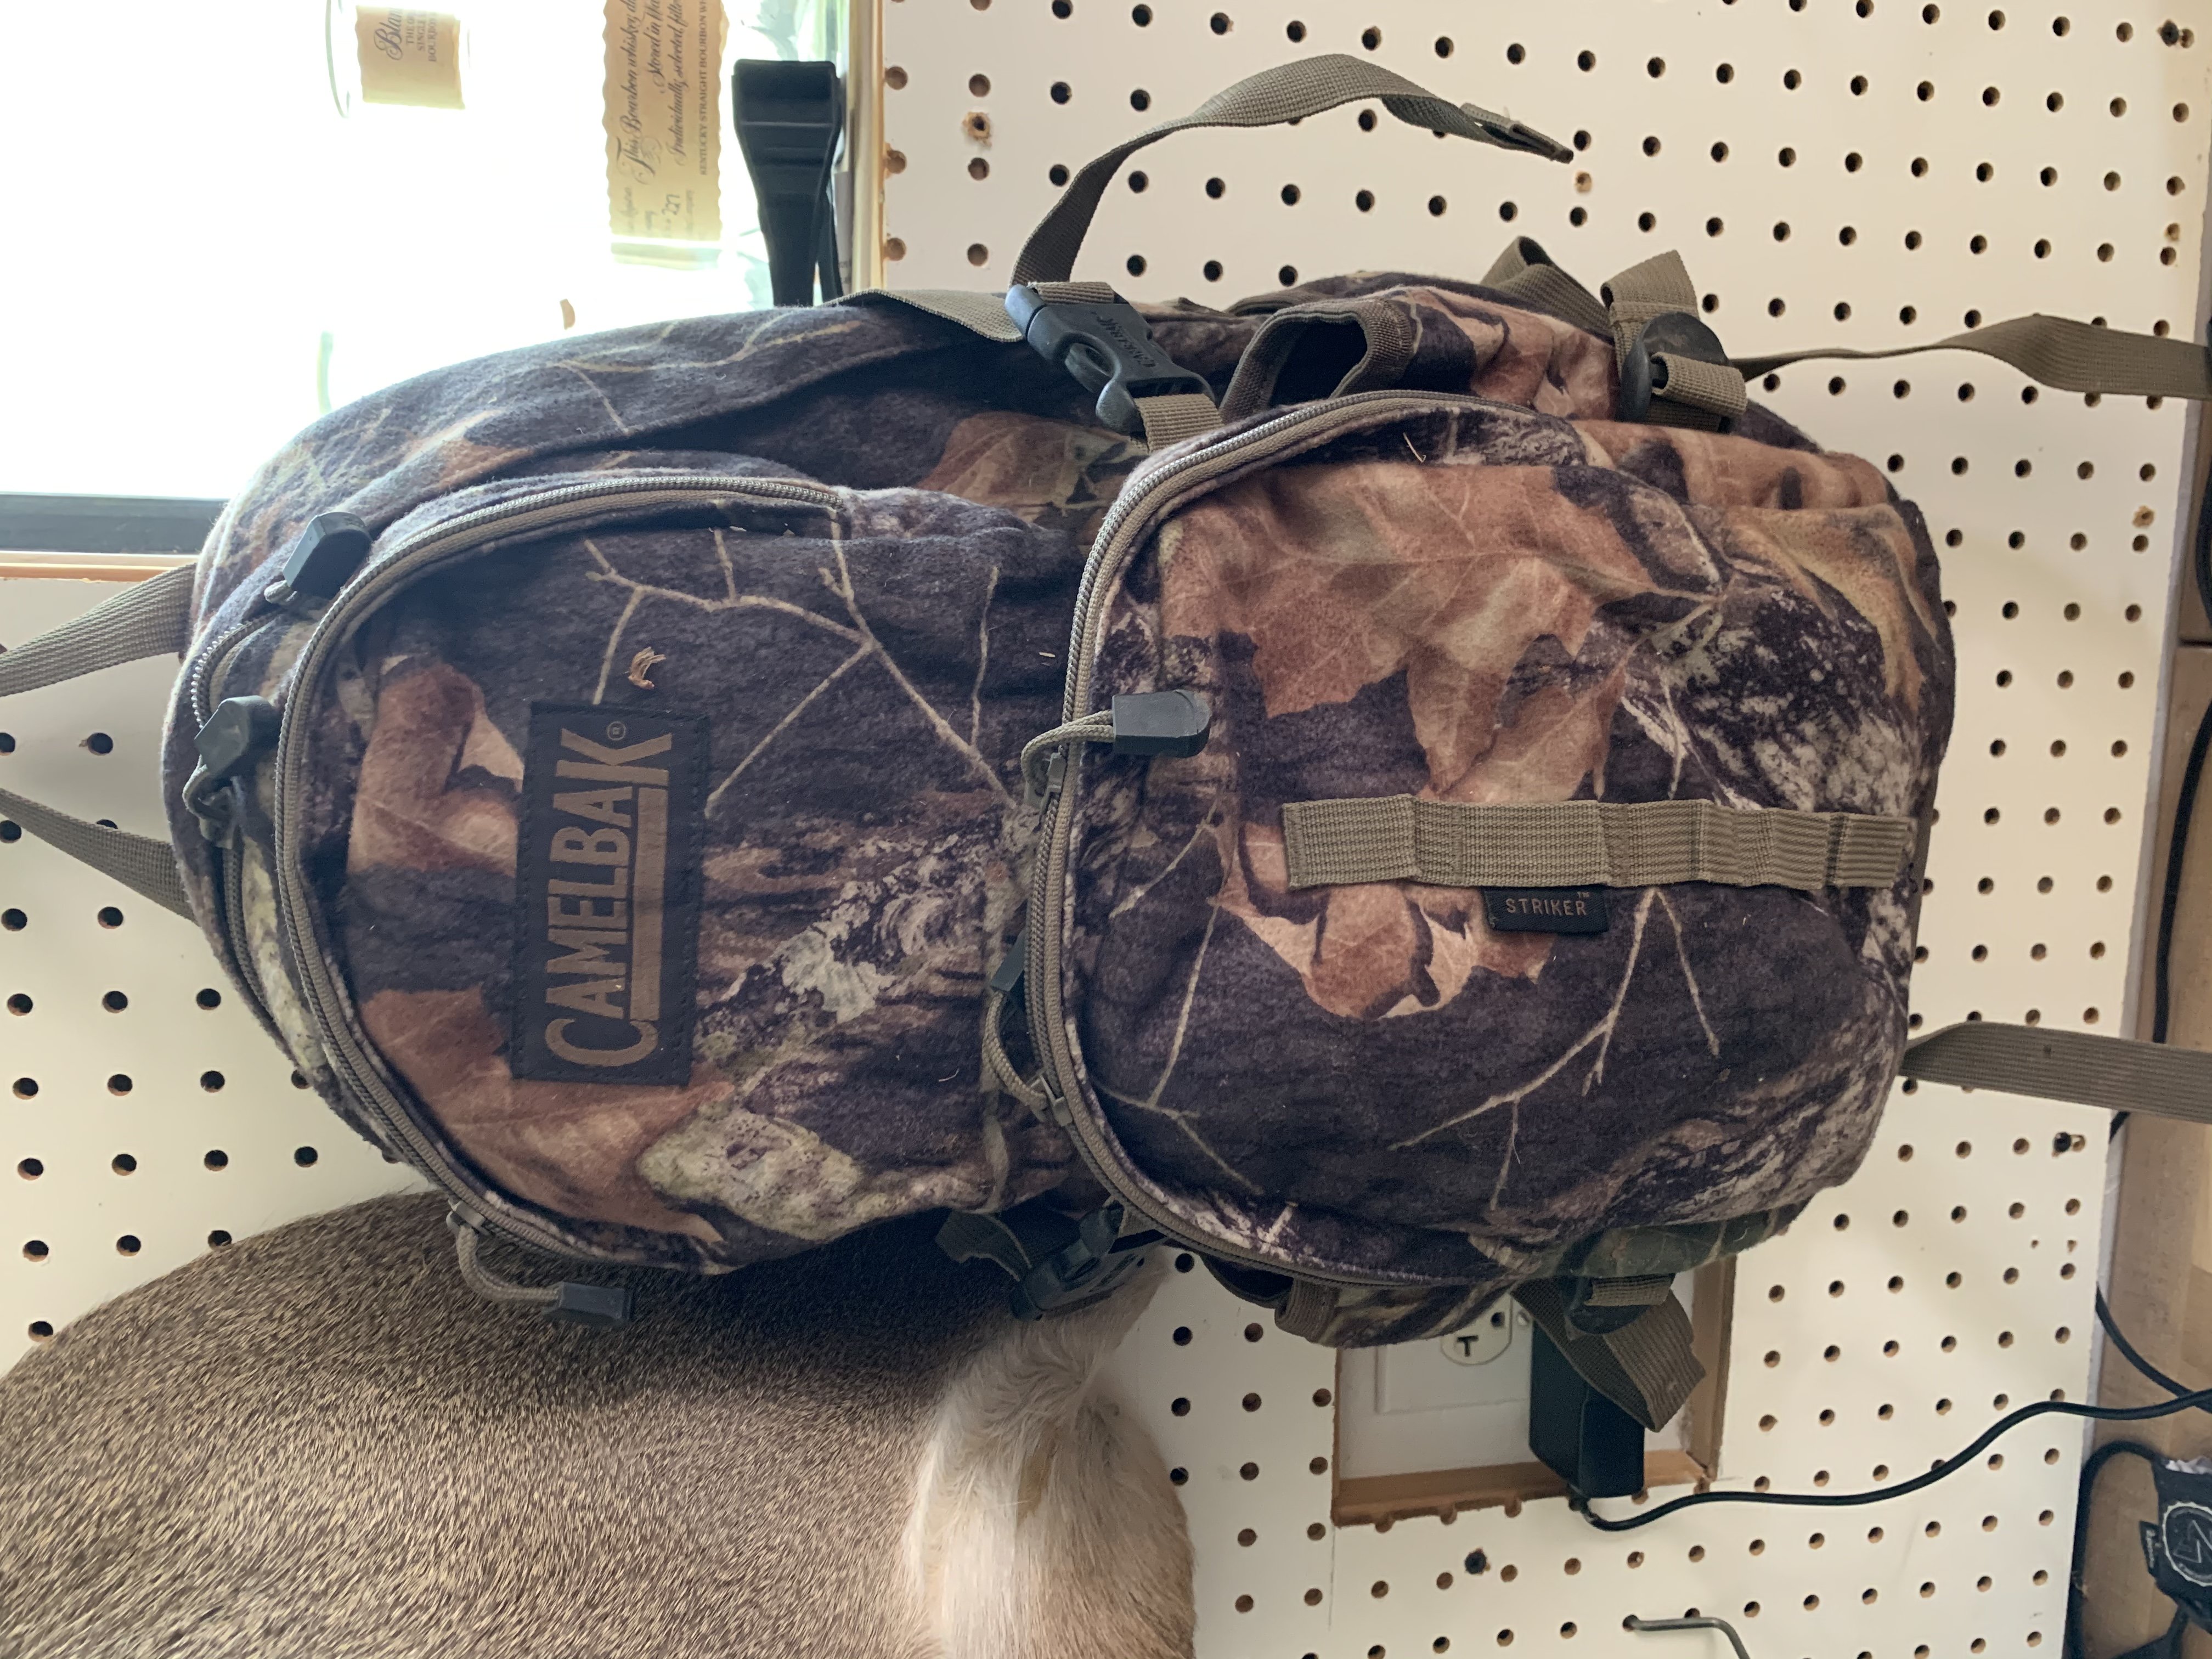 Camelbak Striker **SOLD** - Classified Ads - CouesWhitetail.com ...